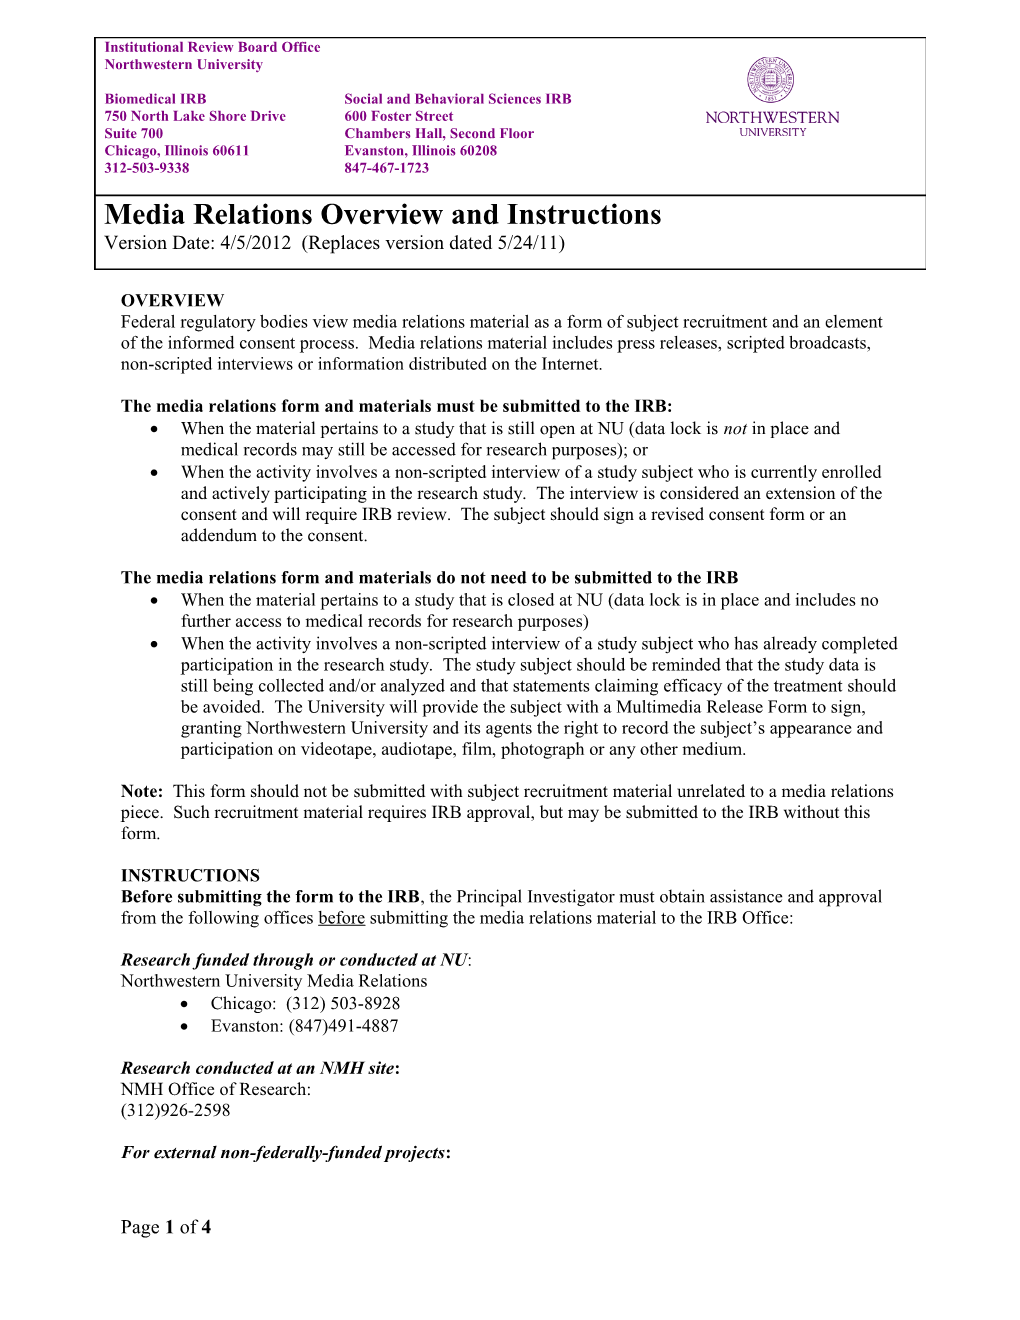 Media Relations Form and Instructions s1